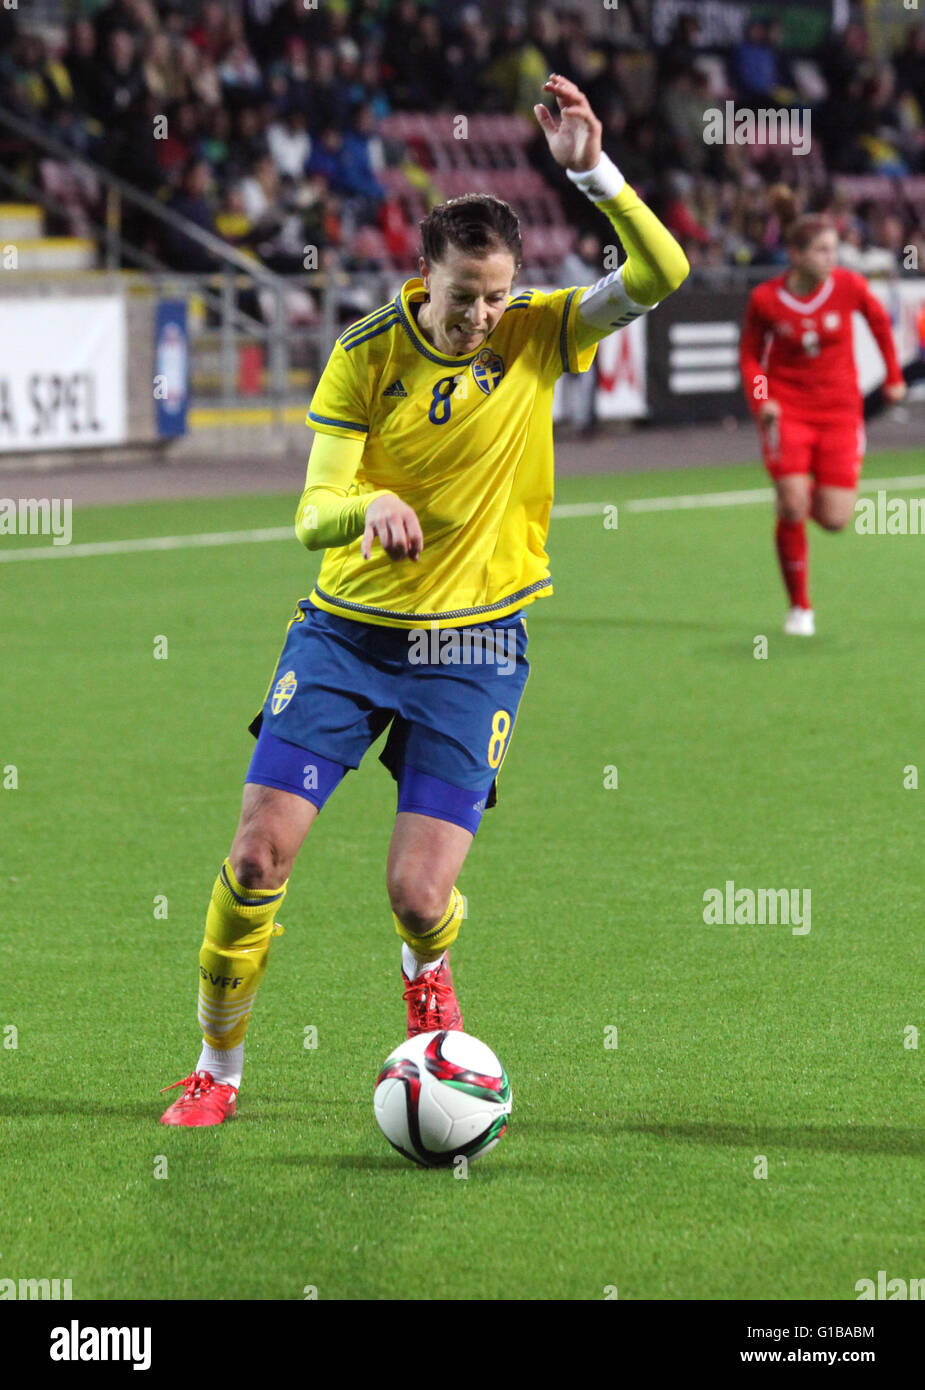 LOTTA SCHELIN Swedish football professional player in France Lyon,here in the national team against Switzerland Stock Photo